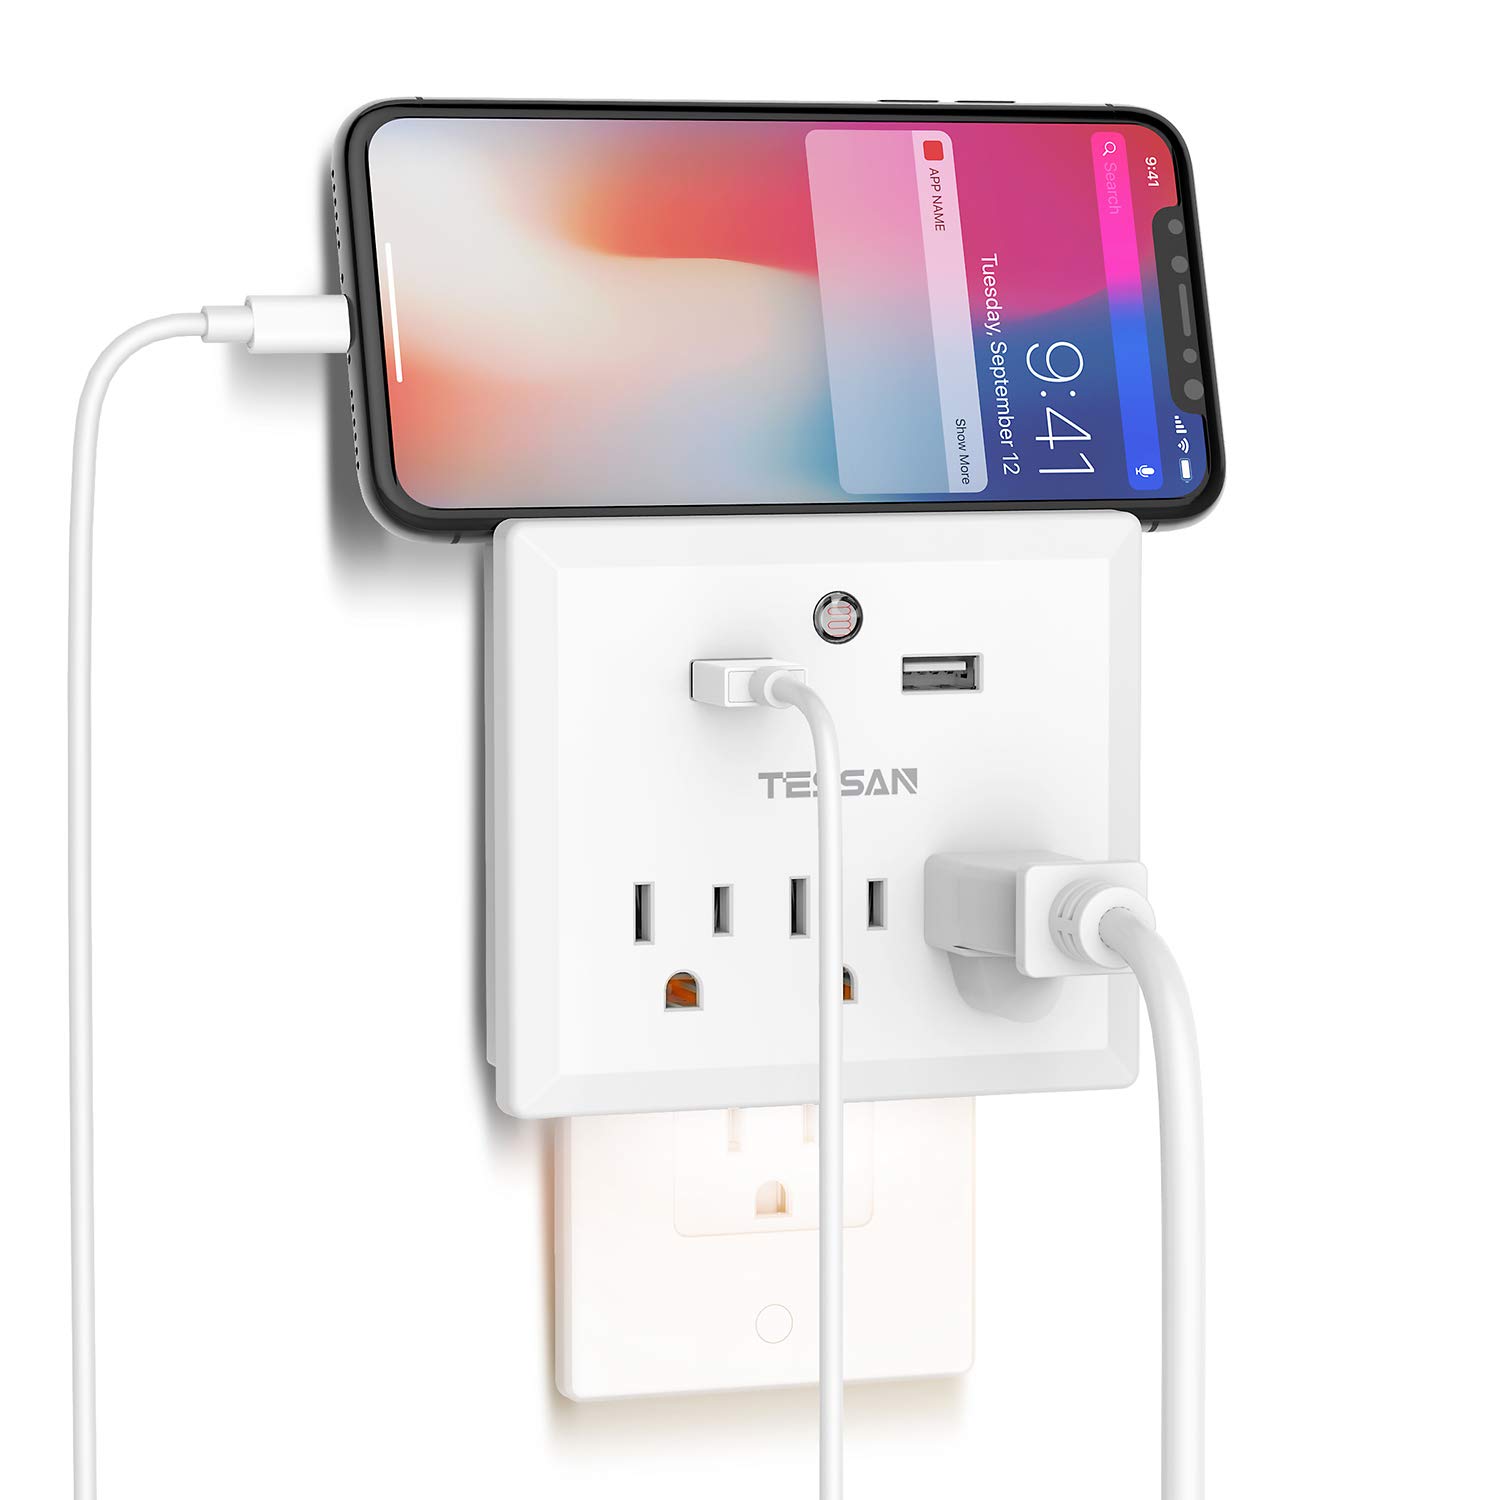 Charging cable plugged into a wall socket